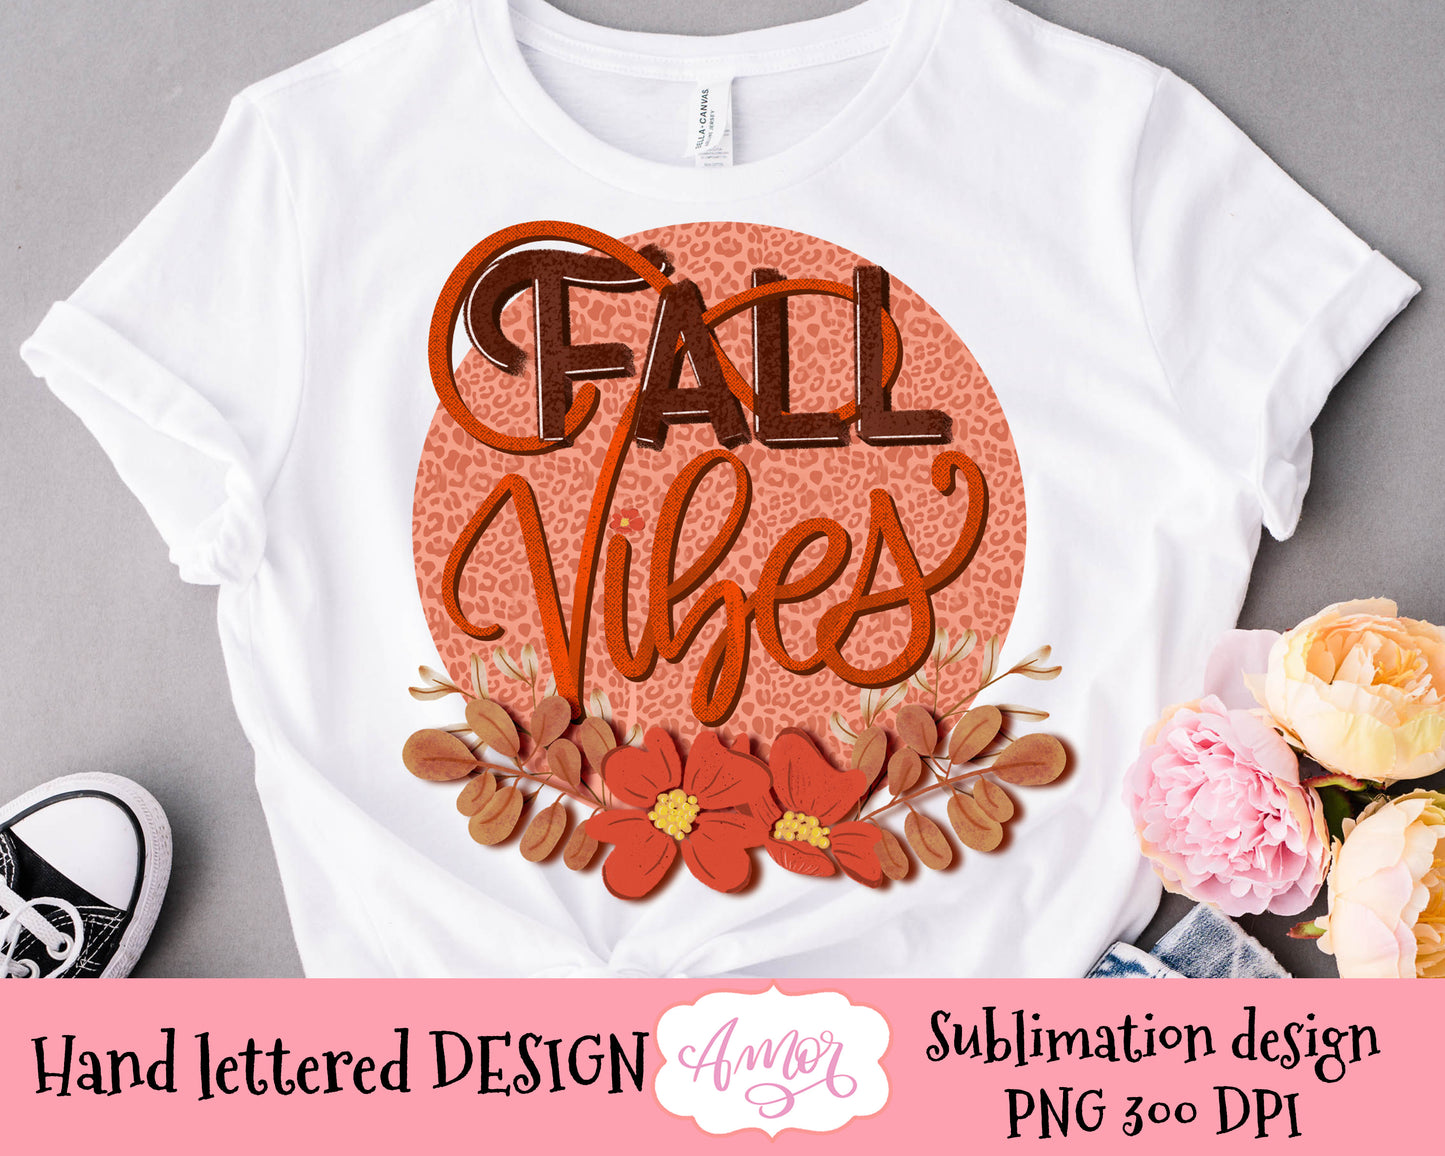 Fall Vibes sublimation design for T-shirts